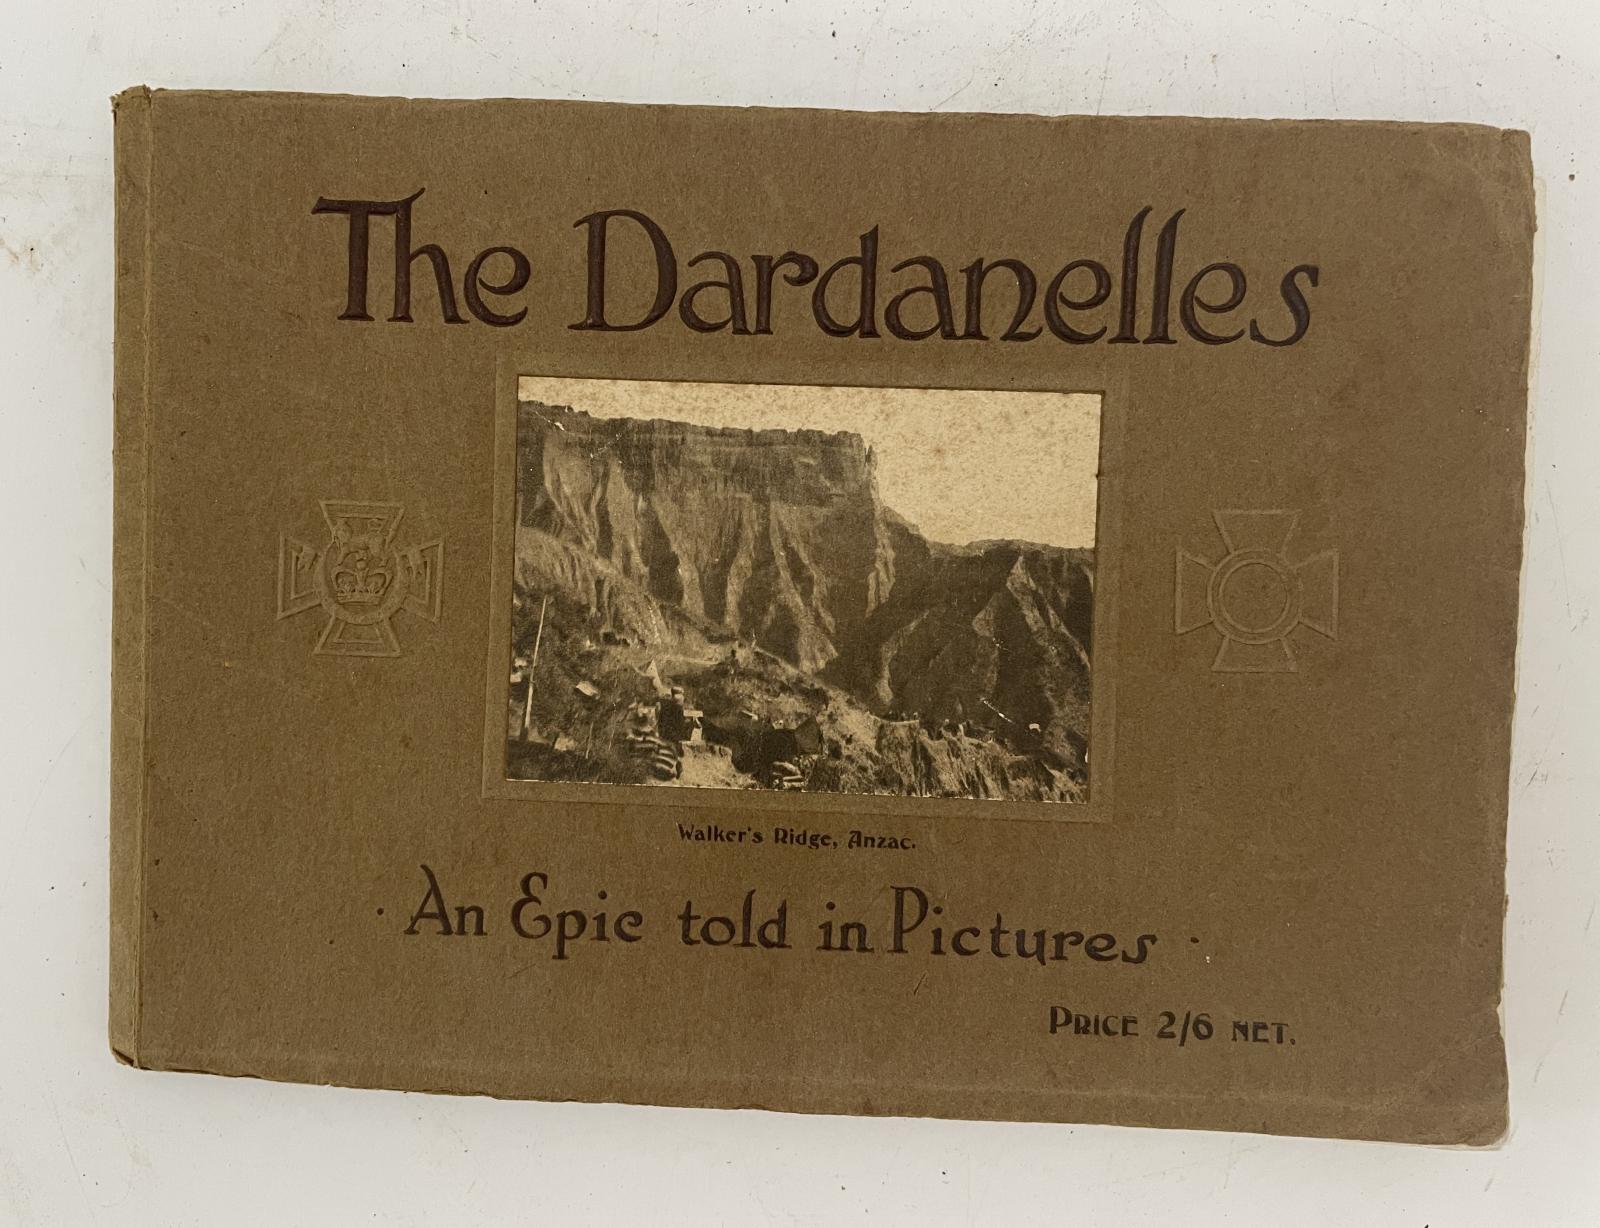 Front cover of "The Dardanelles"